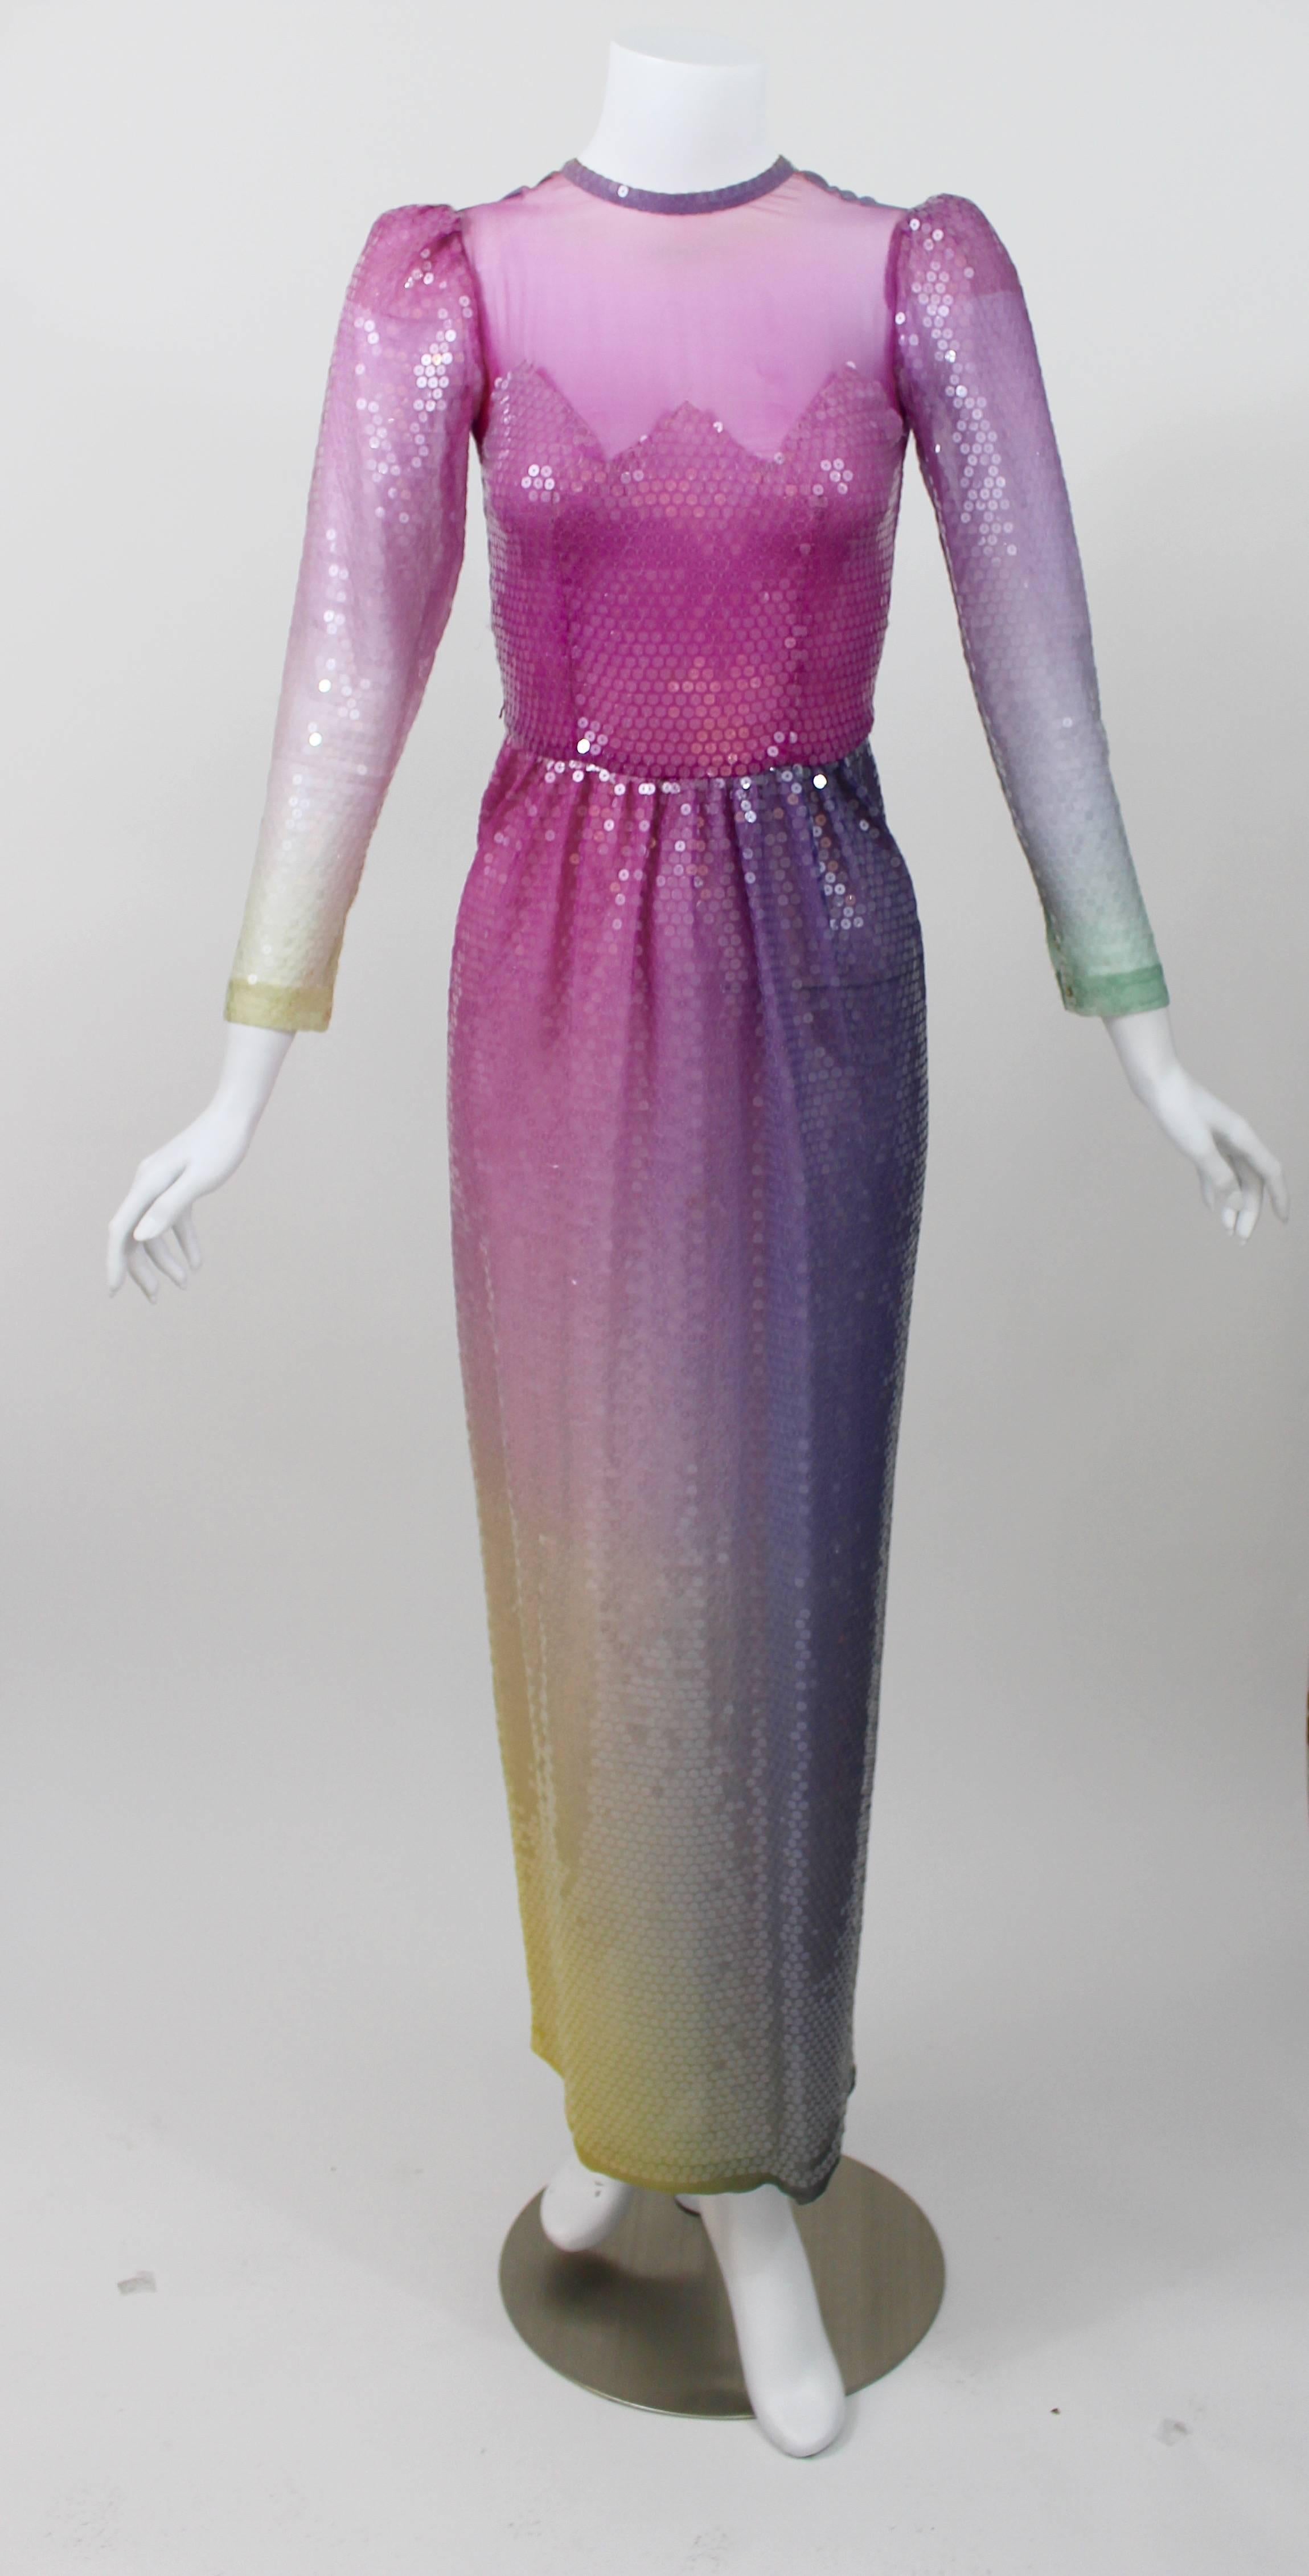 This is a custom couture  gown made for my client in the 1980s.

A magnificent  confection of an evening gown. A  romantic deep hombre pastel sunset of color, offset with a sheer overlay of glistening clear sequins.
An Illusion feminine bodice